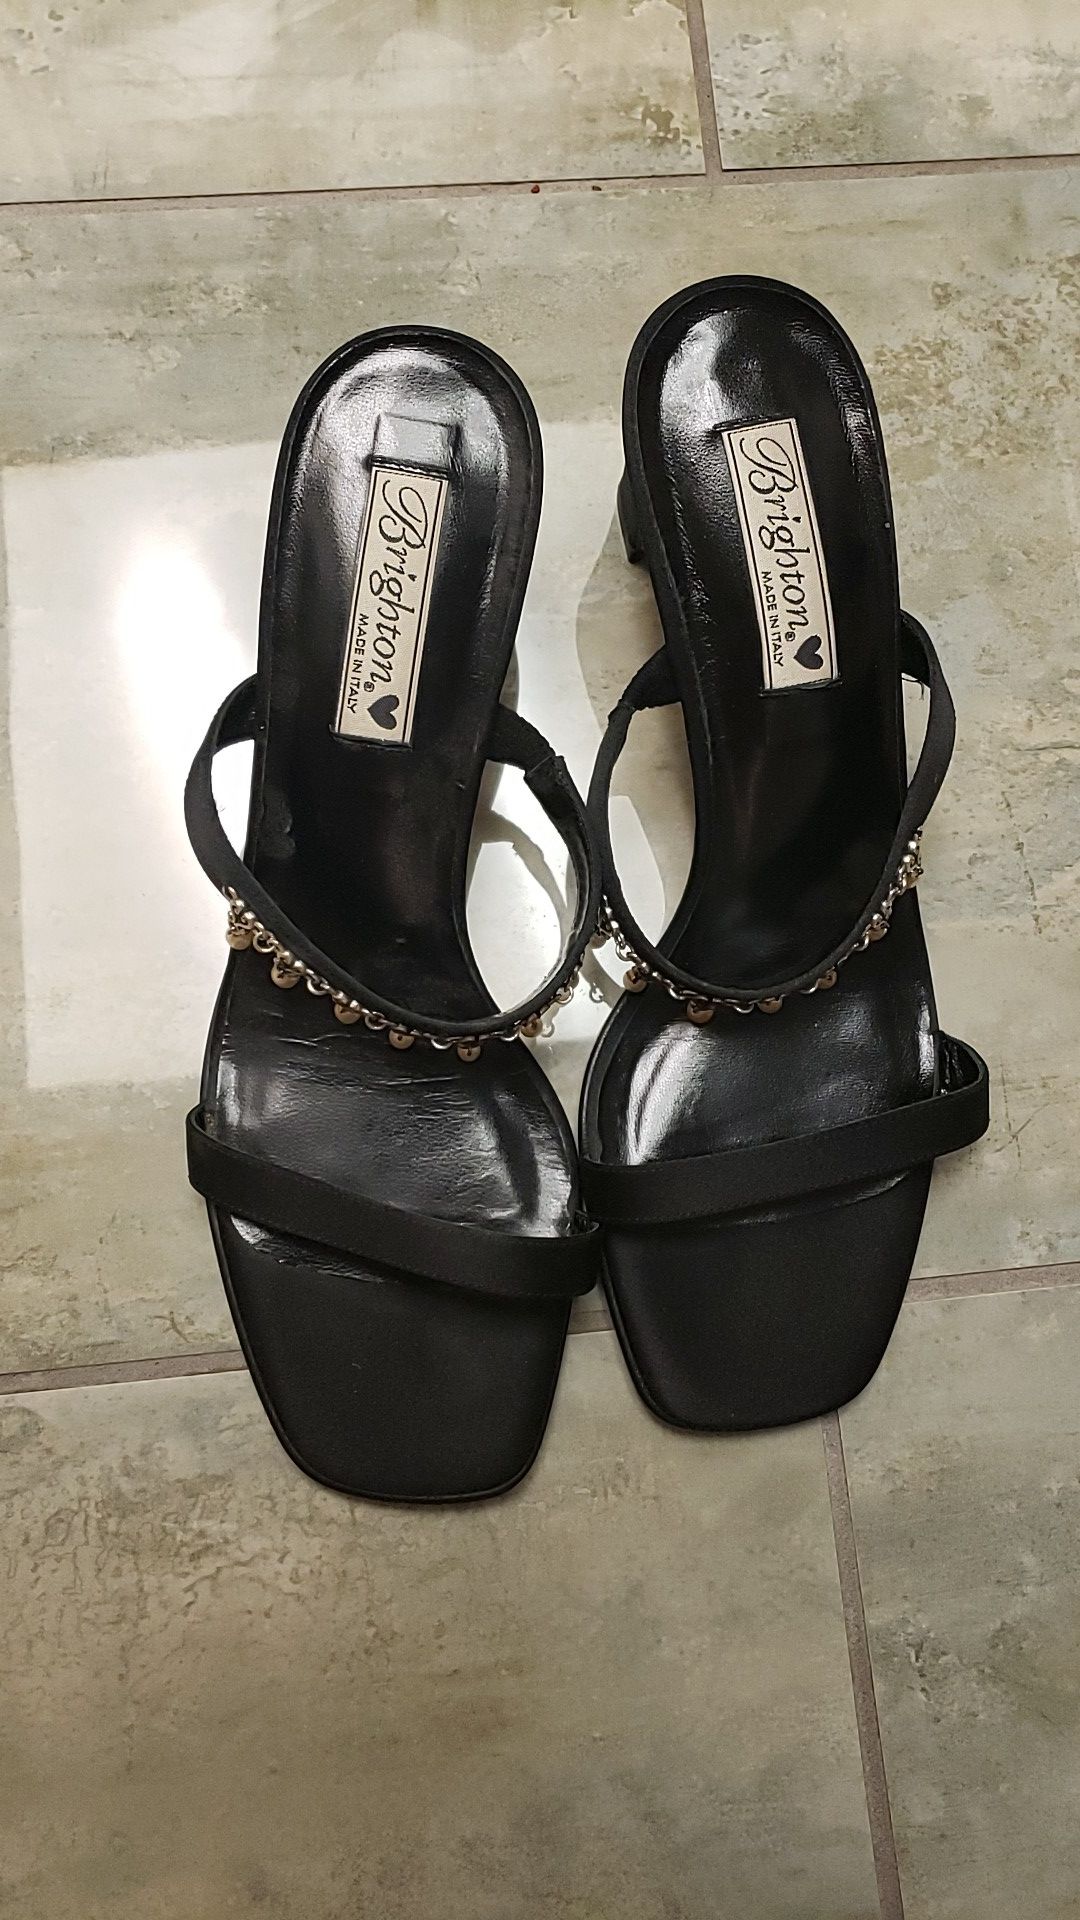 Brighton made in Italy genuine leather size 10 m black high-heeled slip-on sandals accented with silver and pearlish beads dangling designer